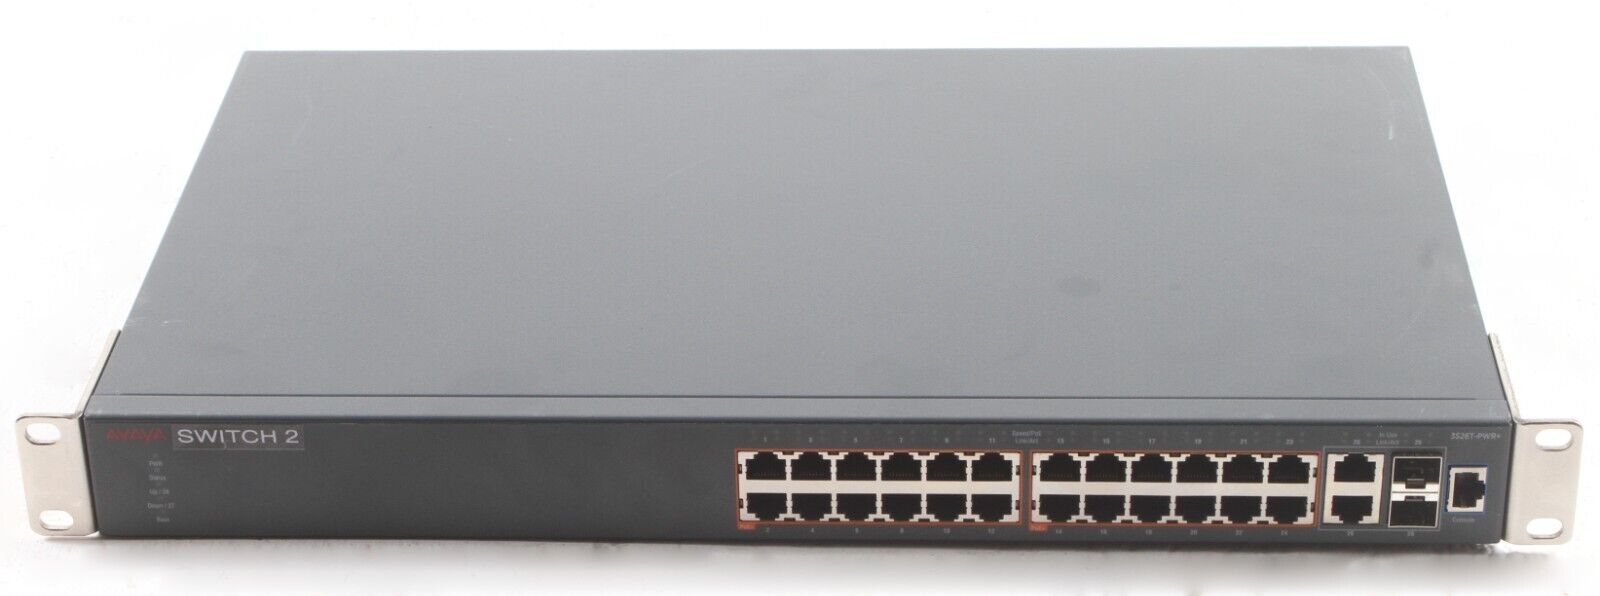 Avaya 3526T-PWR+ 24-Port Manageable PoE+ Fast Ethernet Switch; 6145544